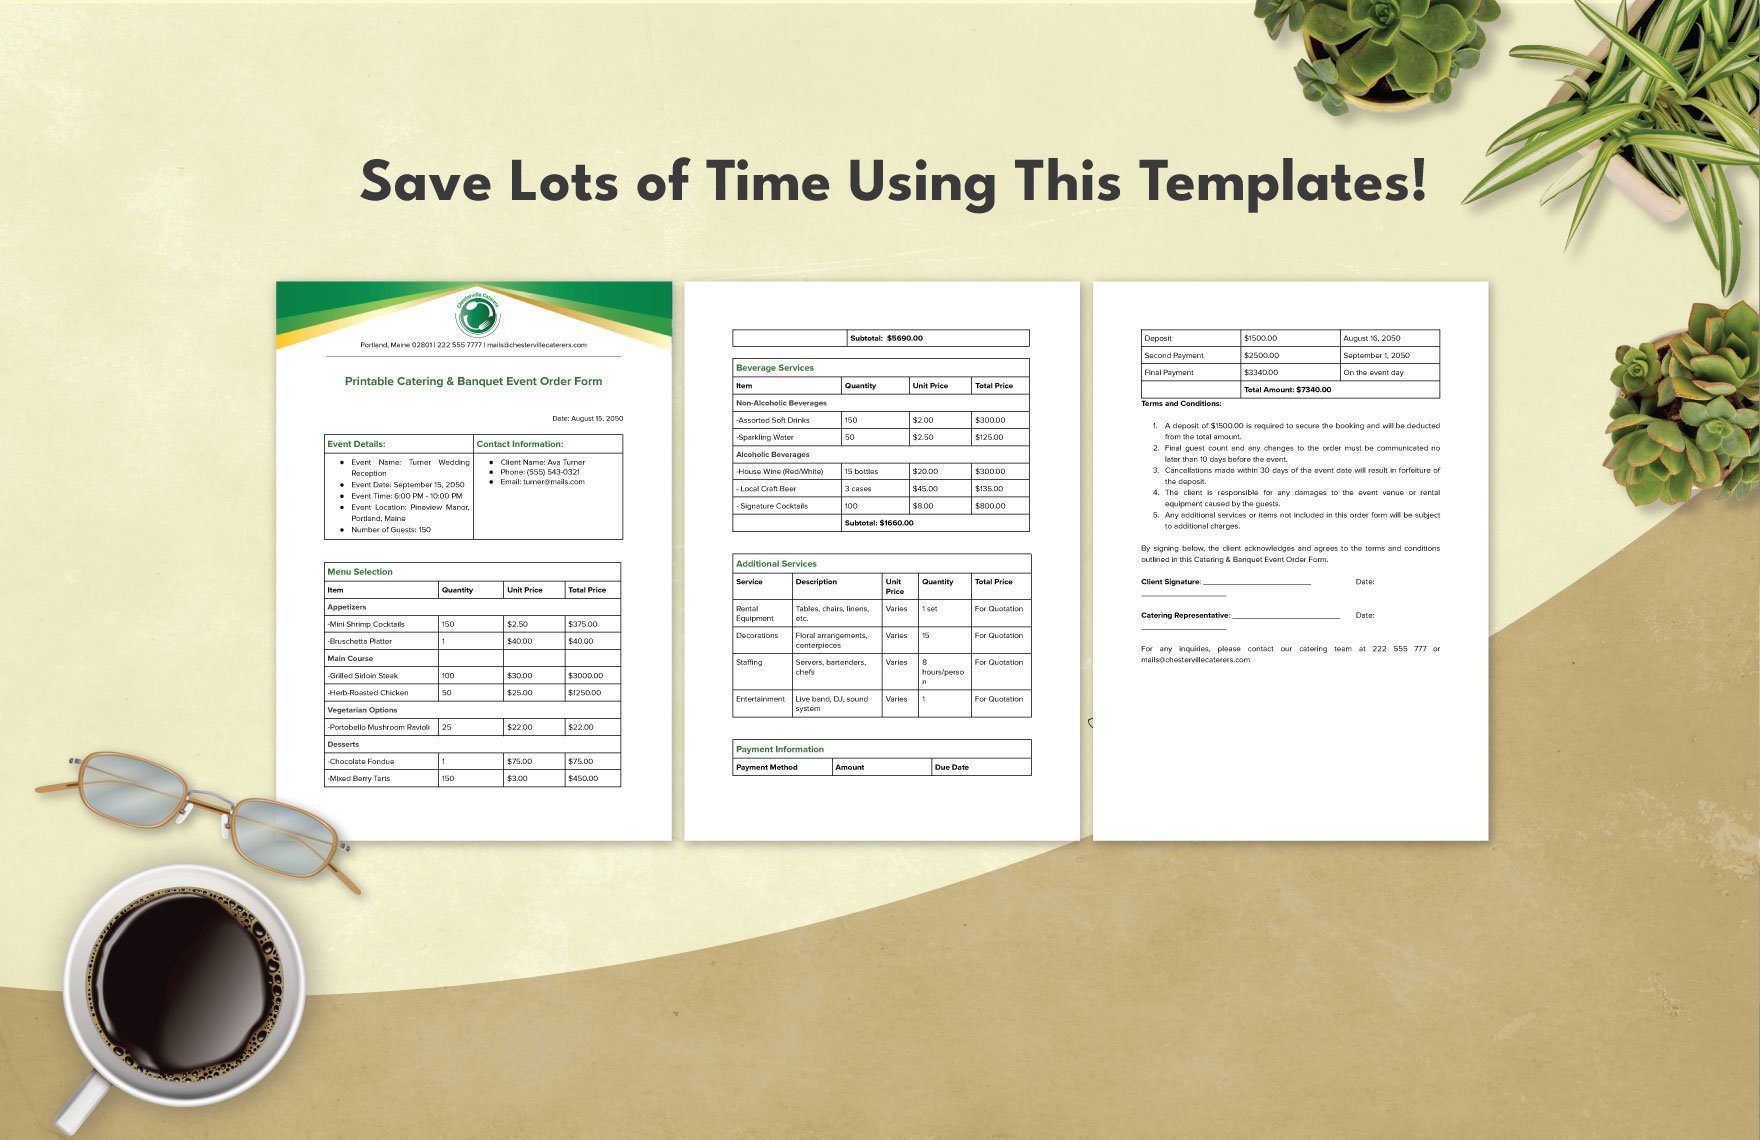 Printable Catering & Banquet Event Order Form Template